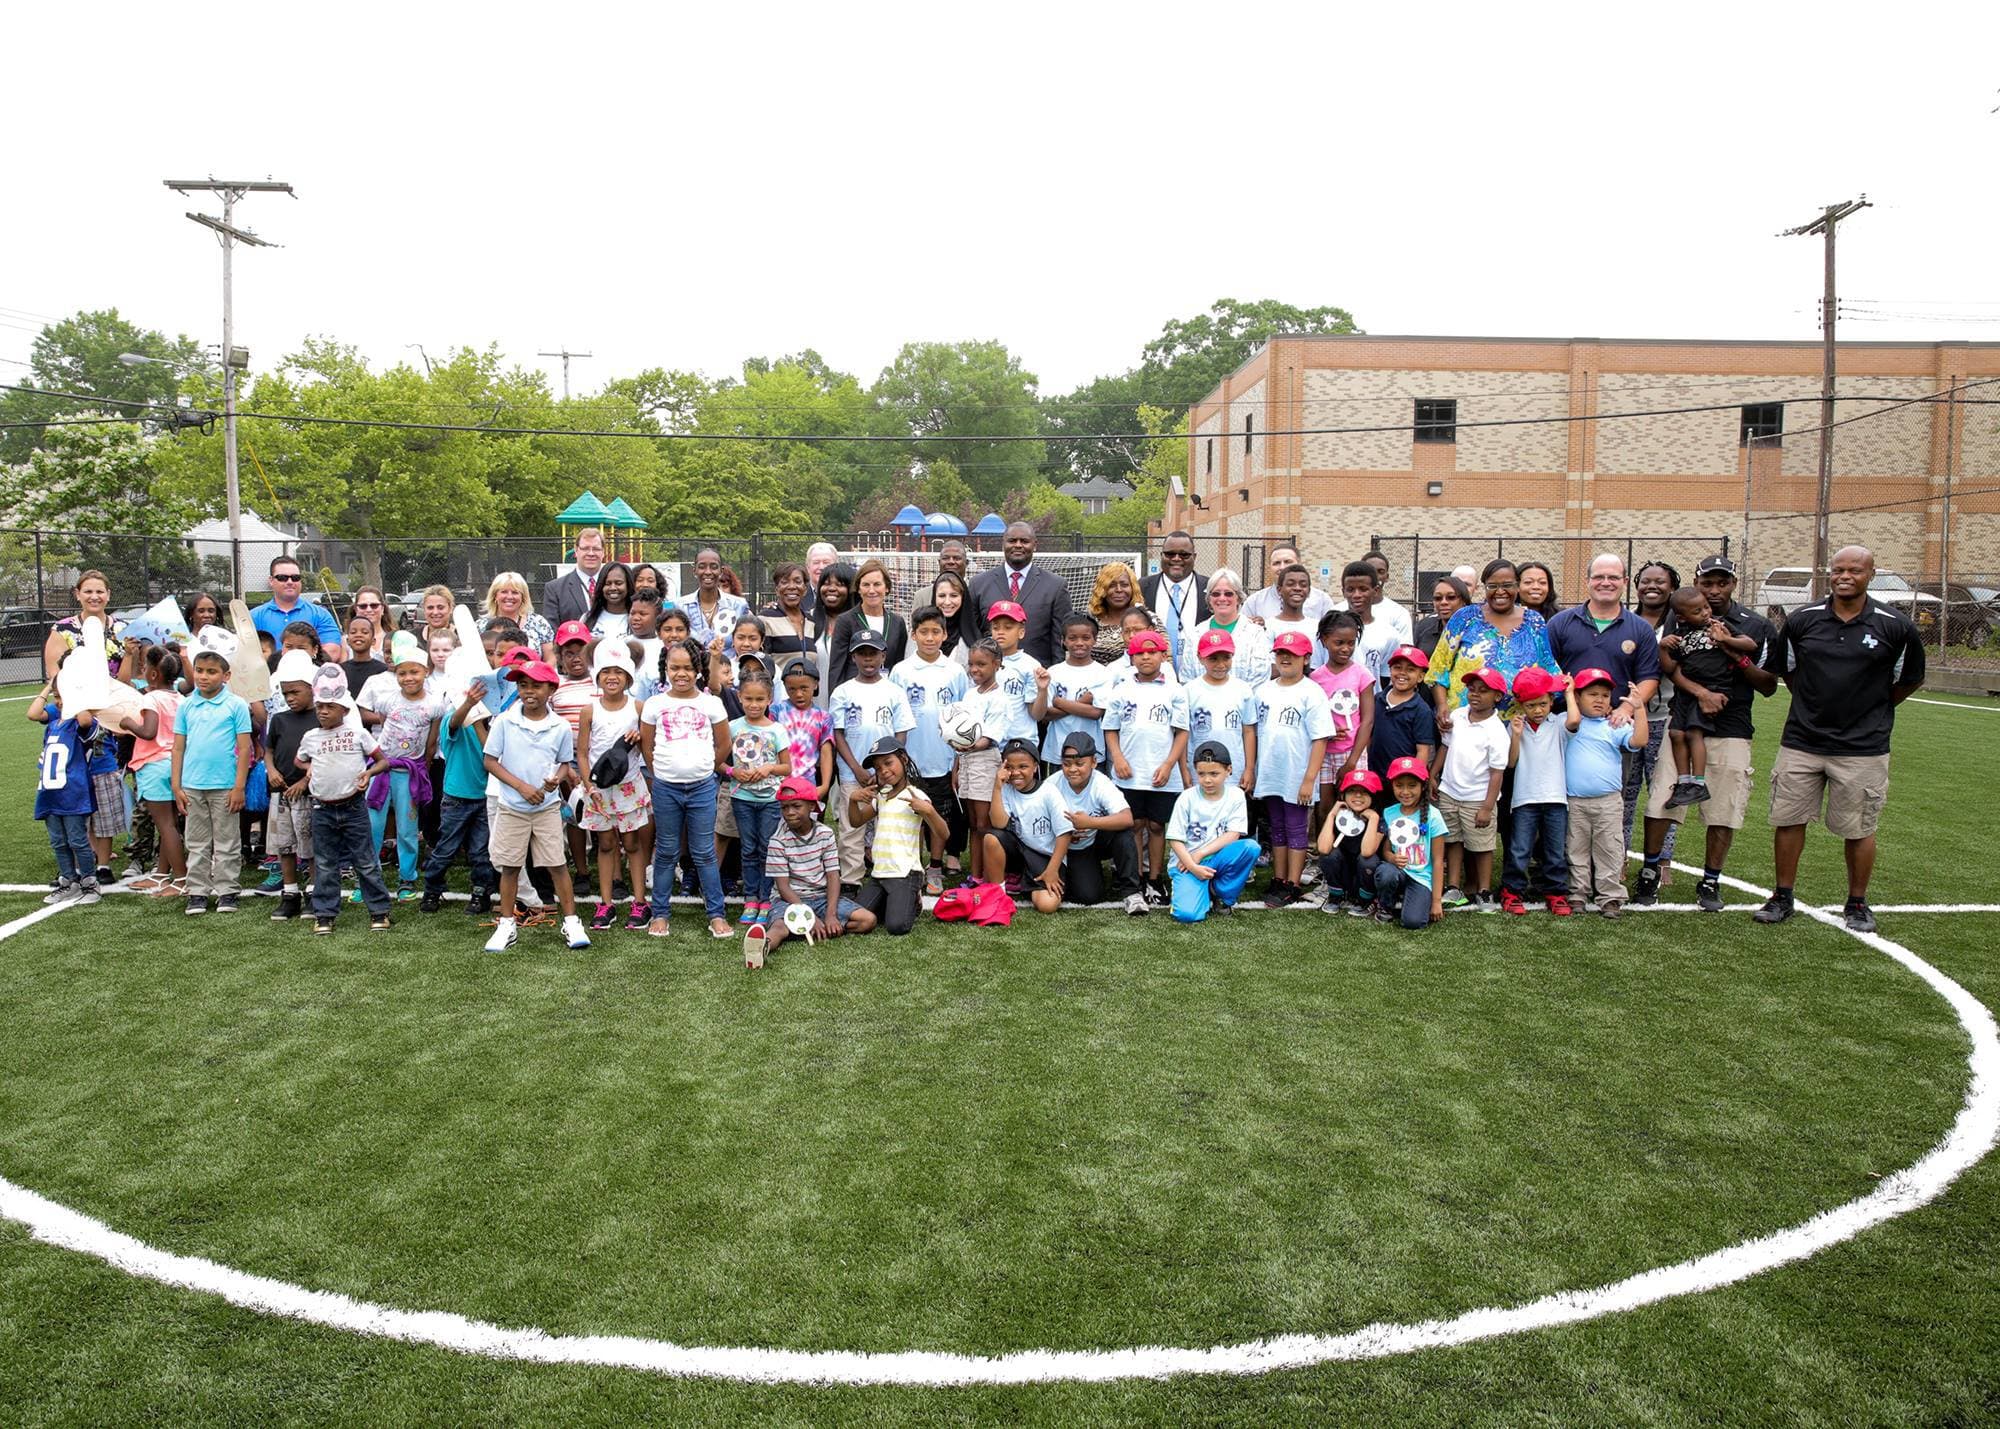 The UAE Embassy in Washington, DC, representatives from the Affordable Housing Alliance and the Hurricane Sandy NJ Relief Fund joined local community leaders and children to celebrate the dedication of a new state-of-the-art soccer field at the Bradley Elementary School in Asbury Park, New Jersey.#UAEUSA http://ow.ly/OpUlc   The new soccer field, the 8th built so far in cities across the United States will benefit hundreds of students on a daily basis, as well as children throughout the community.